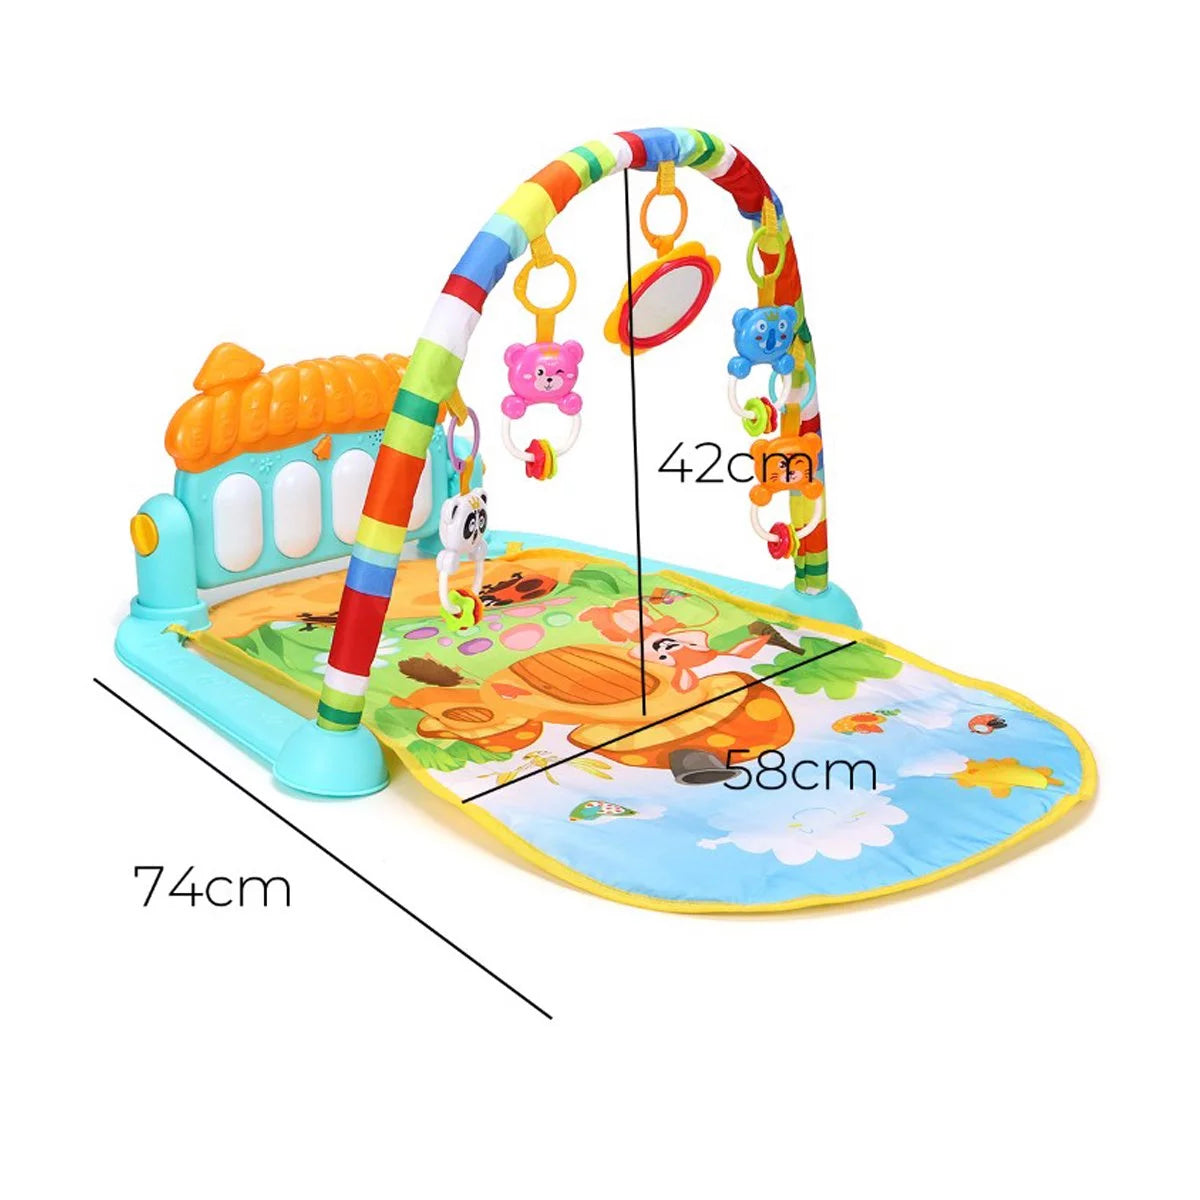 Baby Gym Play Mats Mulitcolor 3 in 1 Kick and Play Piano Gym Activity Center for Infants, Journey of Discovery Activity Gym and Play Mat with Music and Lights